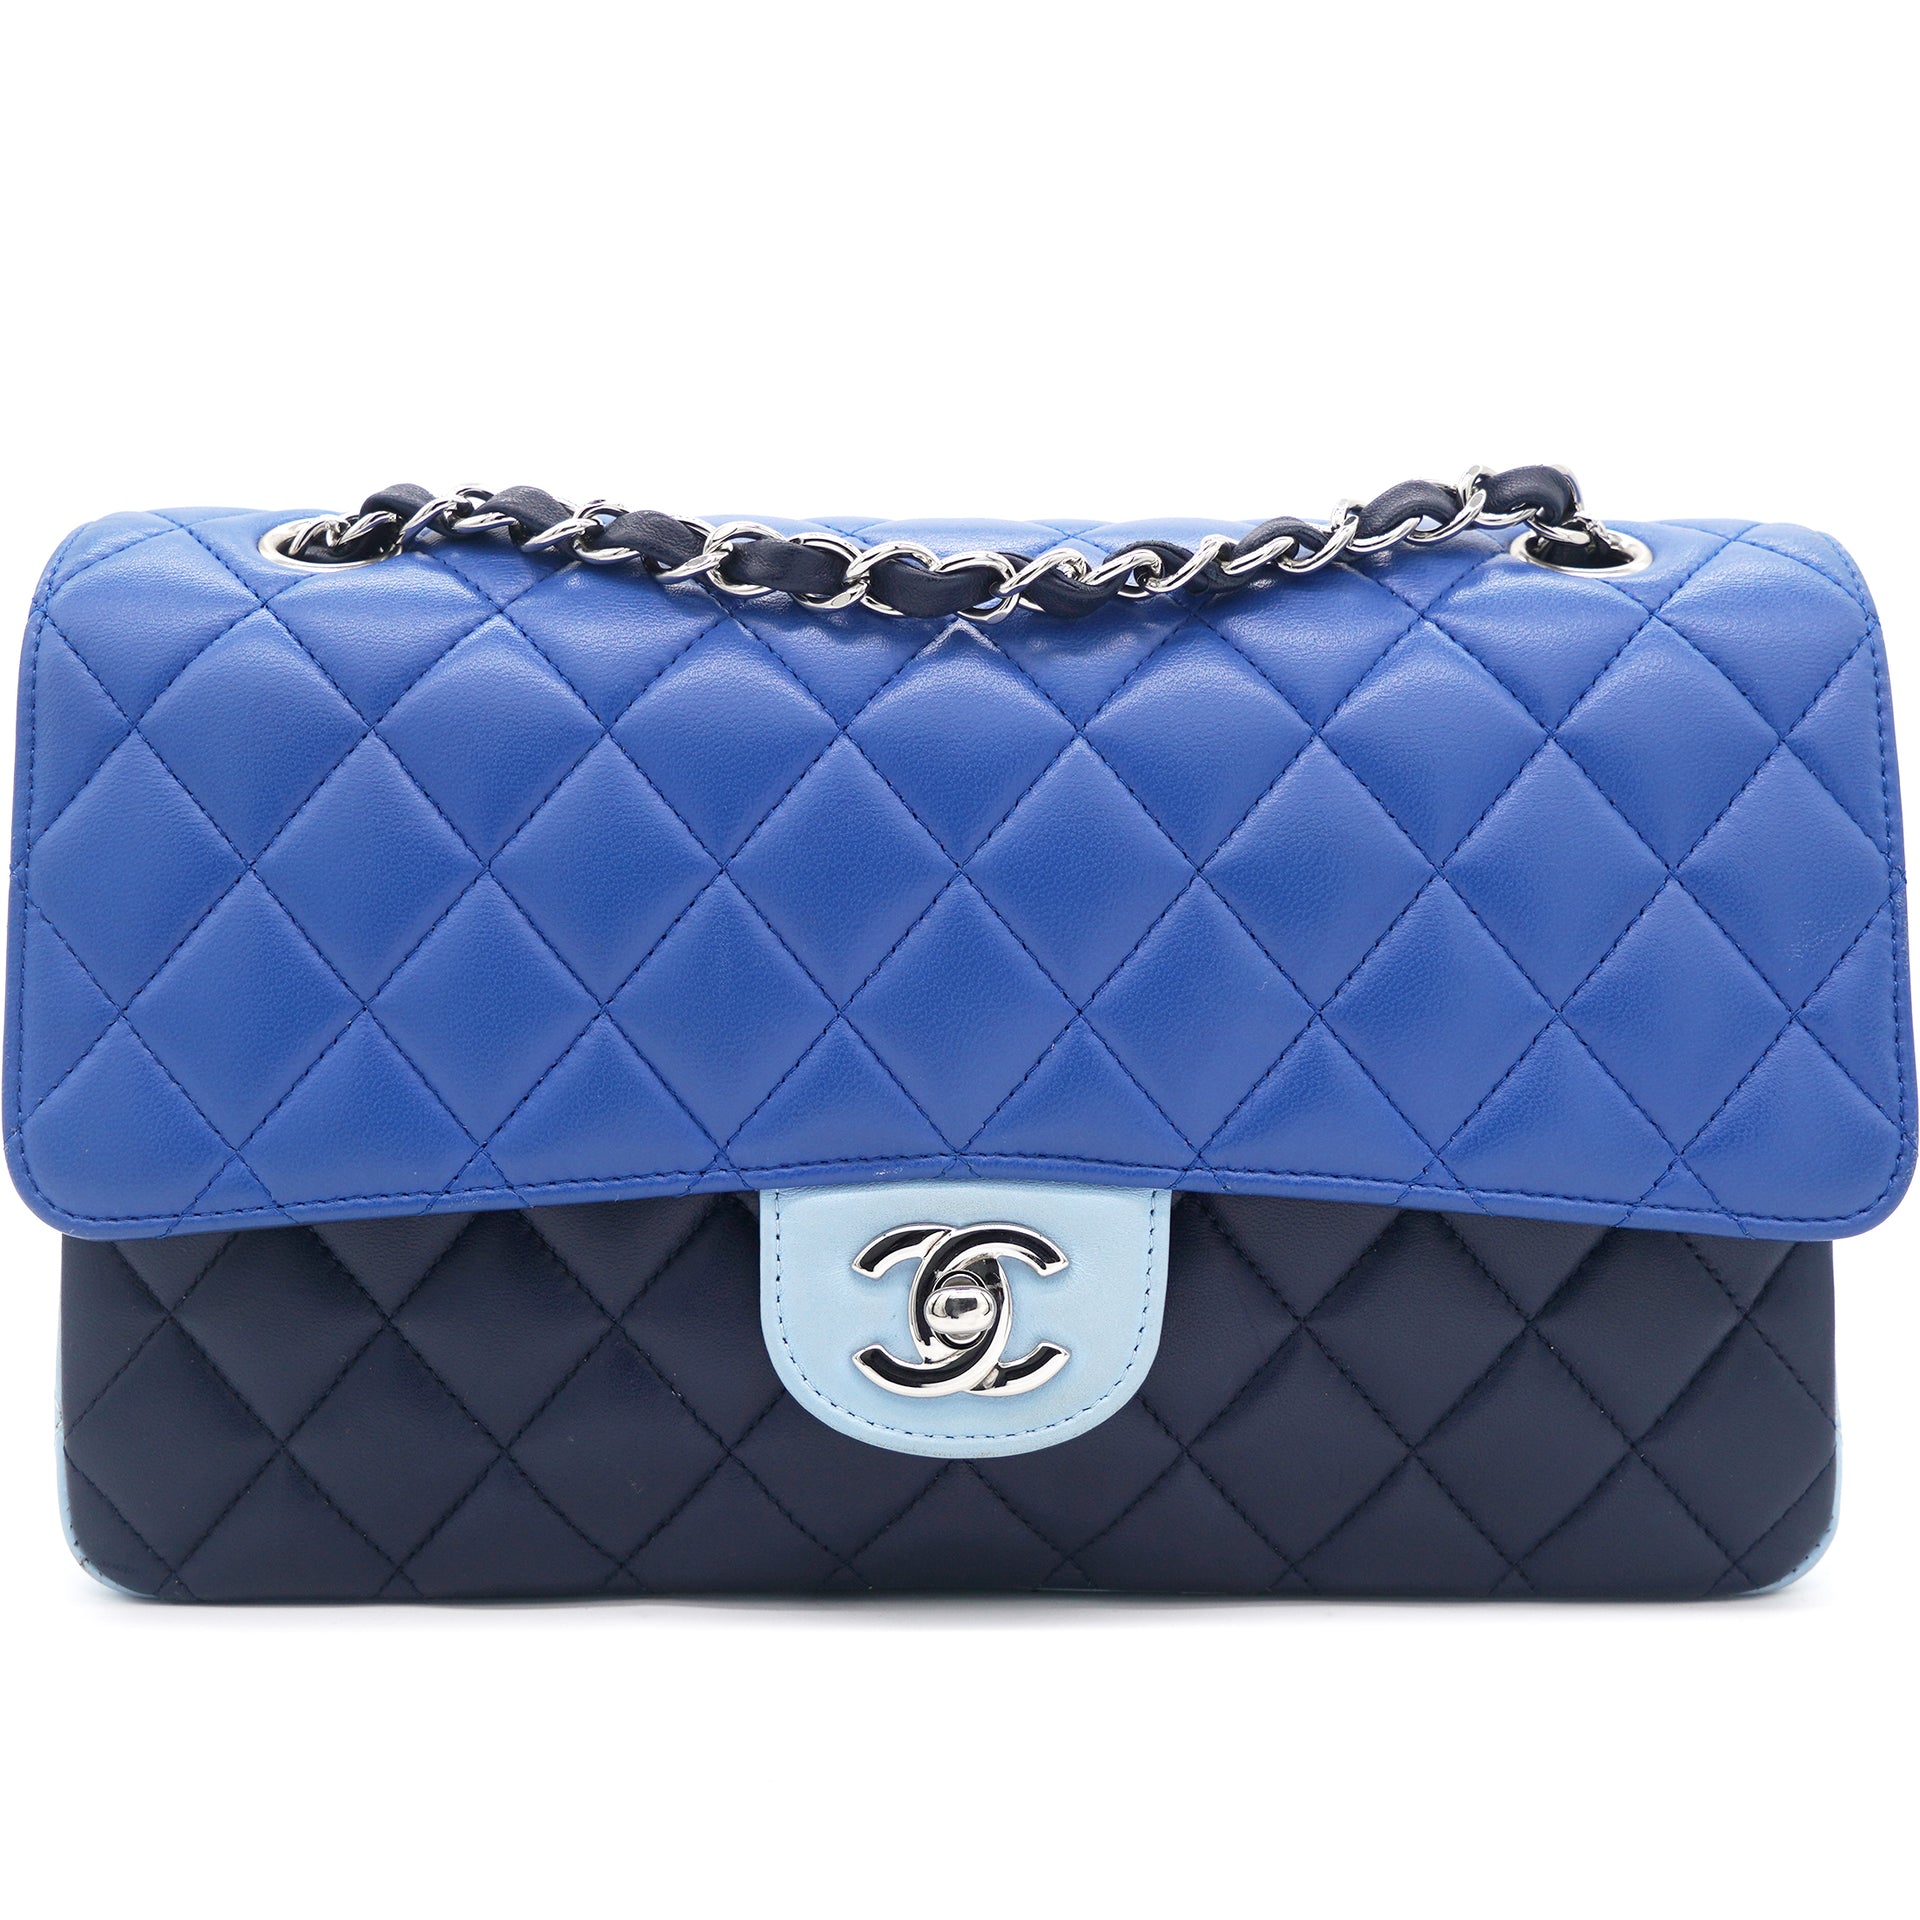 How to find out what my Chanel purse is worth - Quora